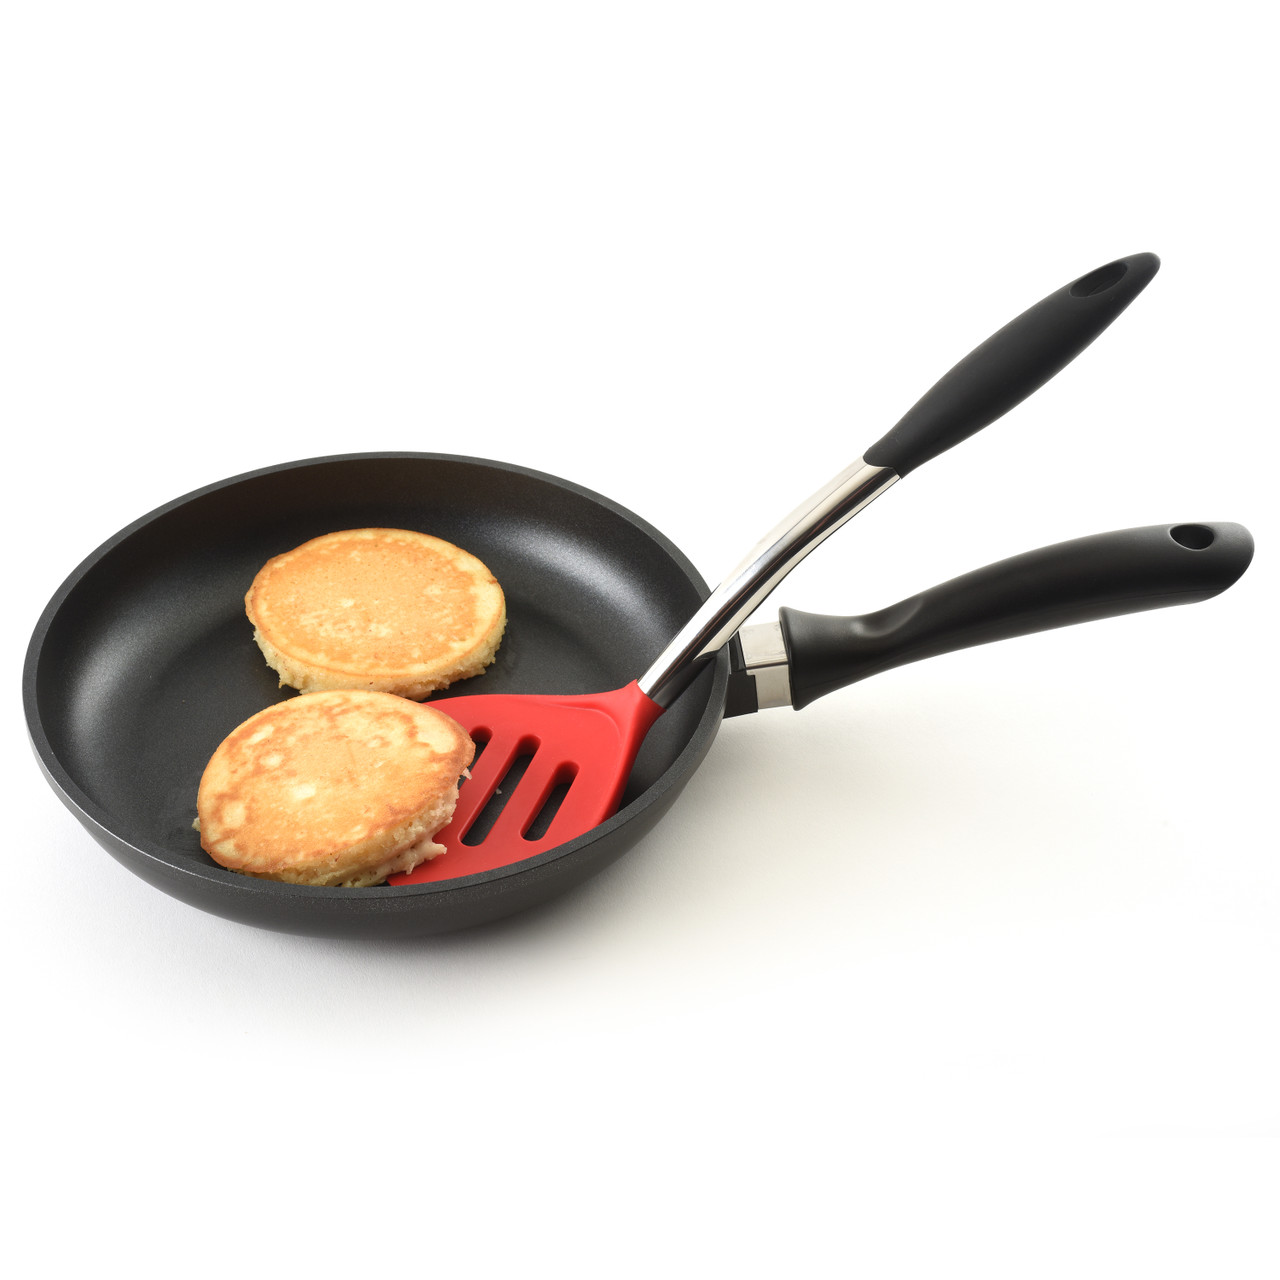 https://cdn11.bigcommerce.com/s-21kj3ntgv1/images/stencil/1280x1280/products/368/1261/Grip-EZ-Wide-Turner-Silicone-and-Stainless-Steel-In-Use-with-pancakes__22704.1603829653.jpg?c=2